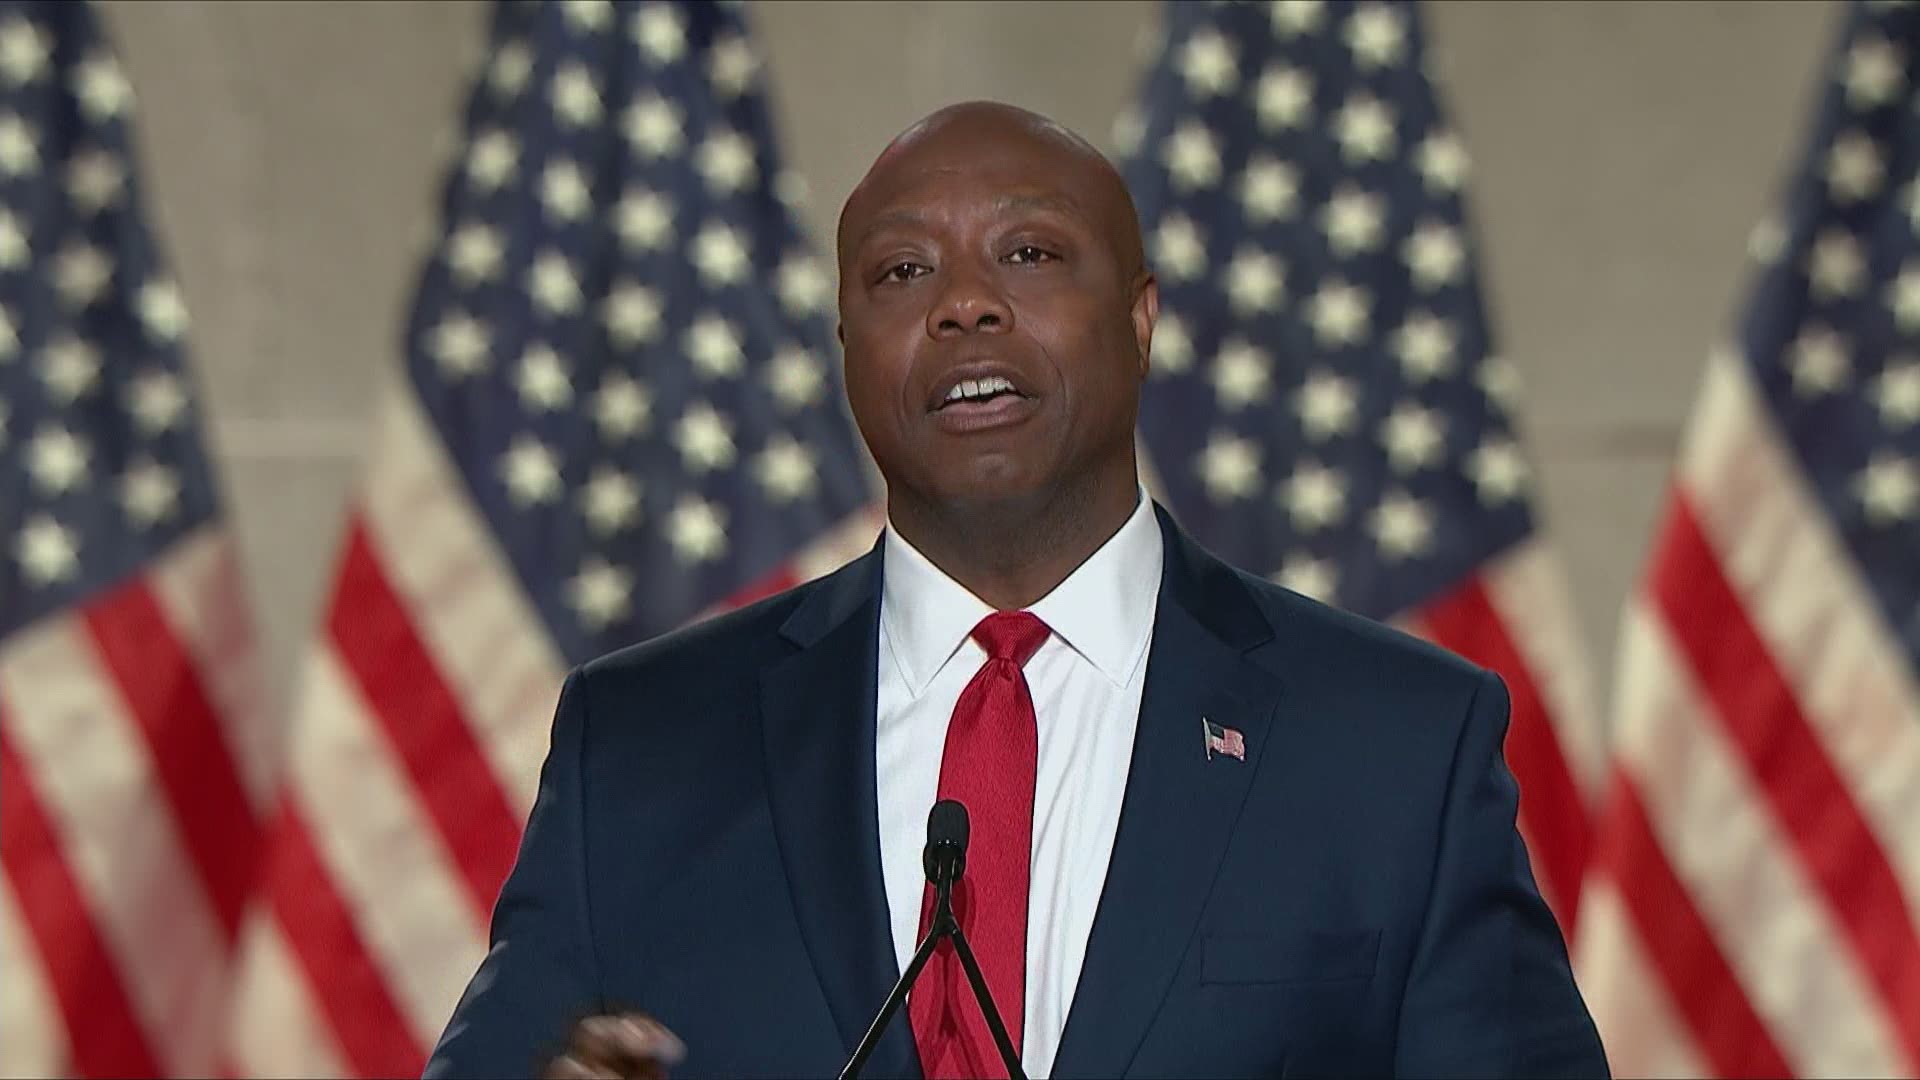 During a speech at the RNC, Senator Tim Scott shared his personal story and explained why he thinks voters should support President Trump.